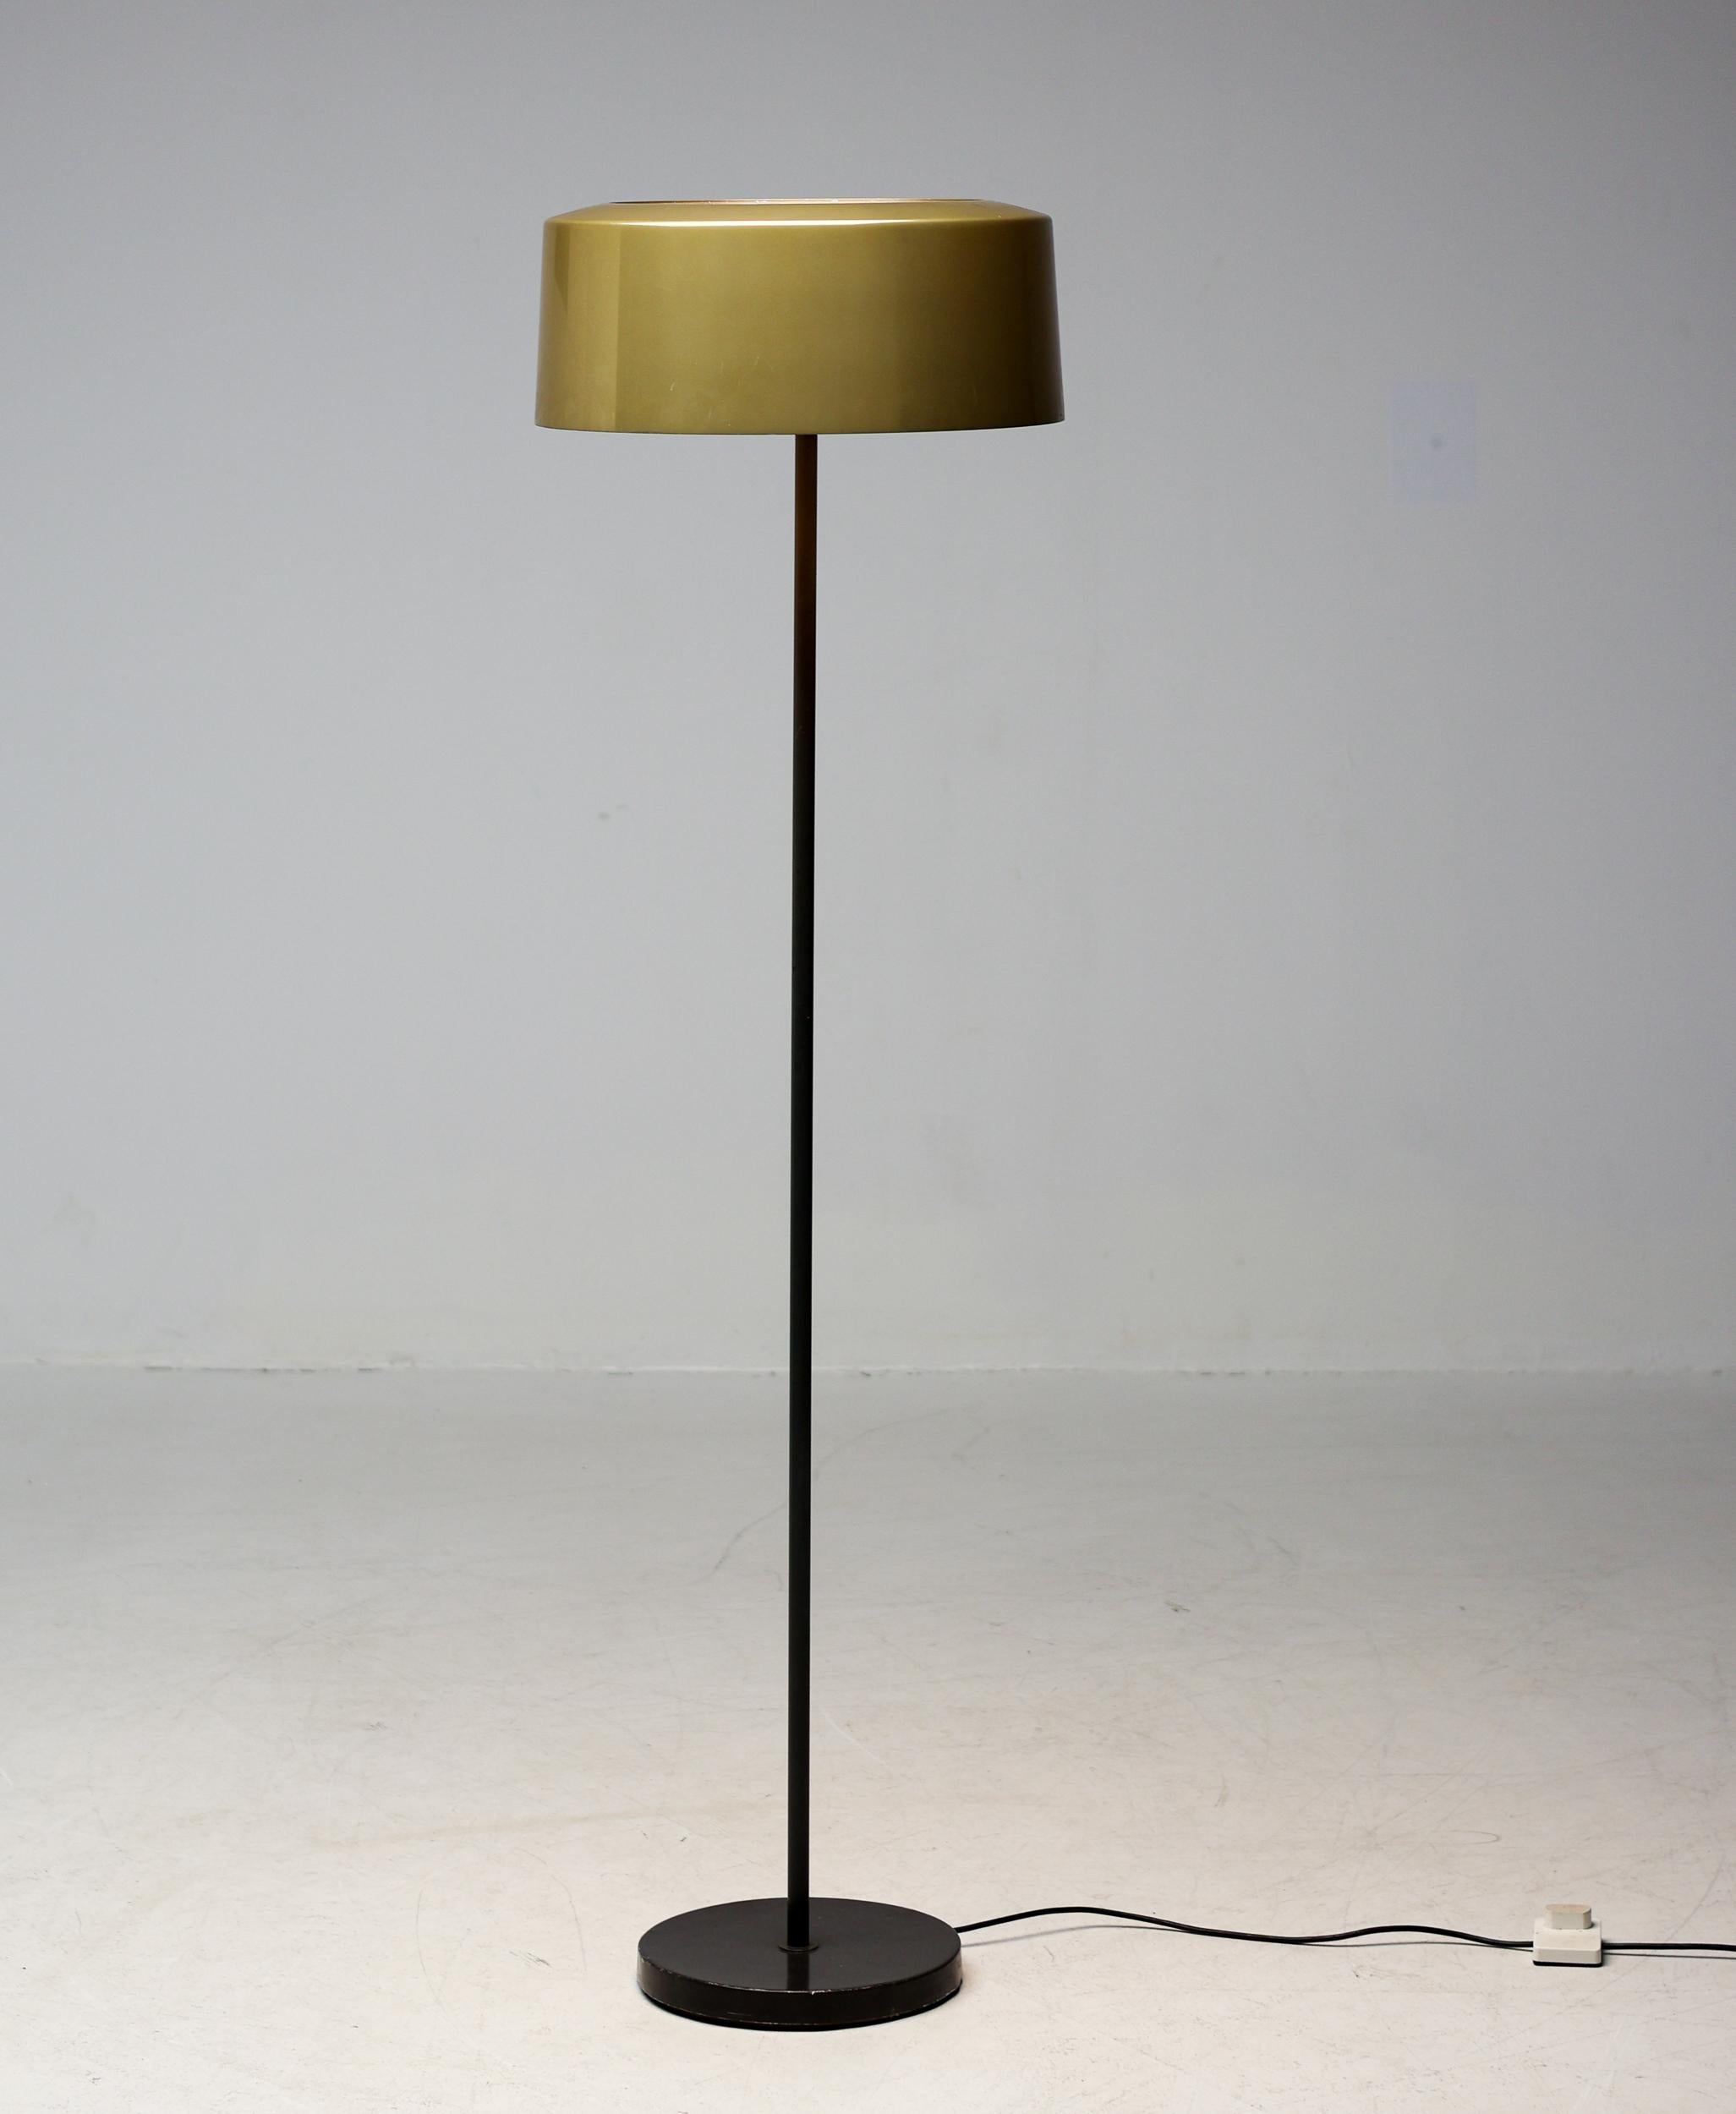 A beautiful floor lamp from the 1950s, with a bronze enameled aluminum shade. 
Designed by Lisa-Johansson Pape and manufactured by Orno. 
The top of the shade is covered with glass, the bottom has louvres similar to the lamps of Alvar Aalto.
The